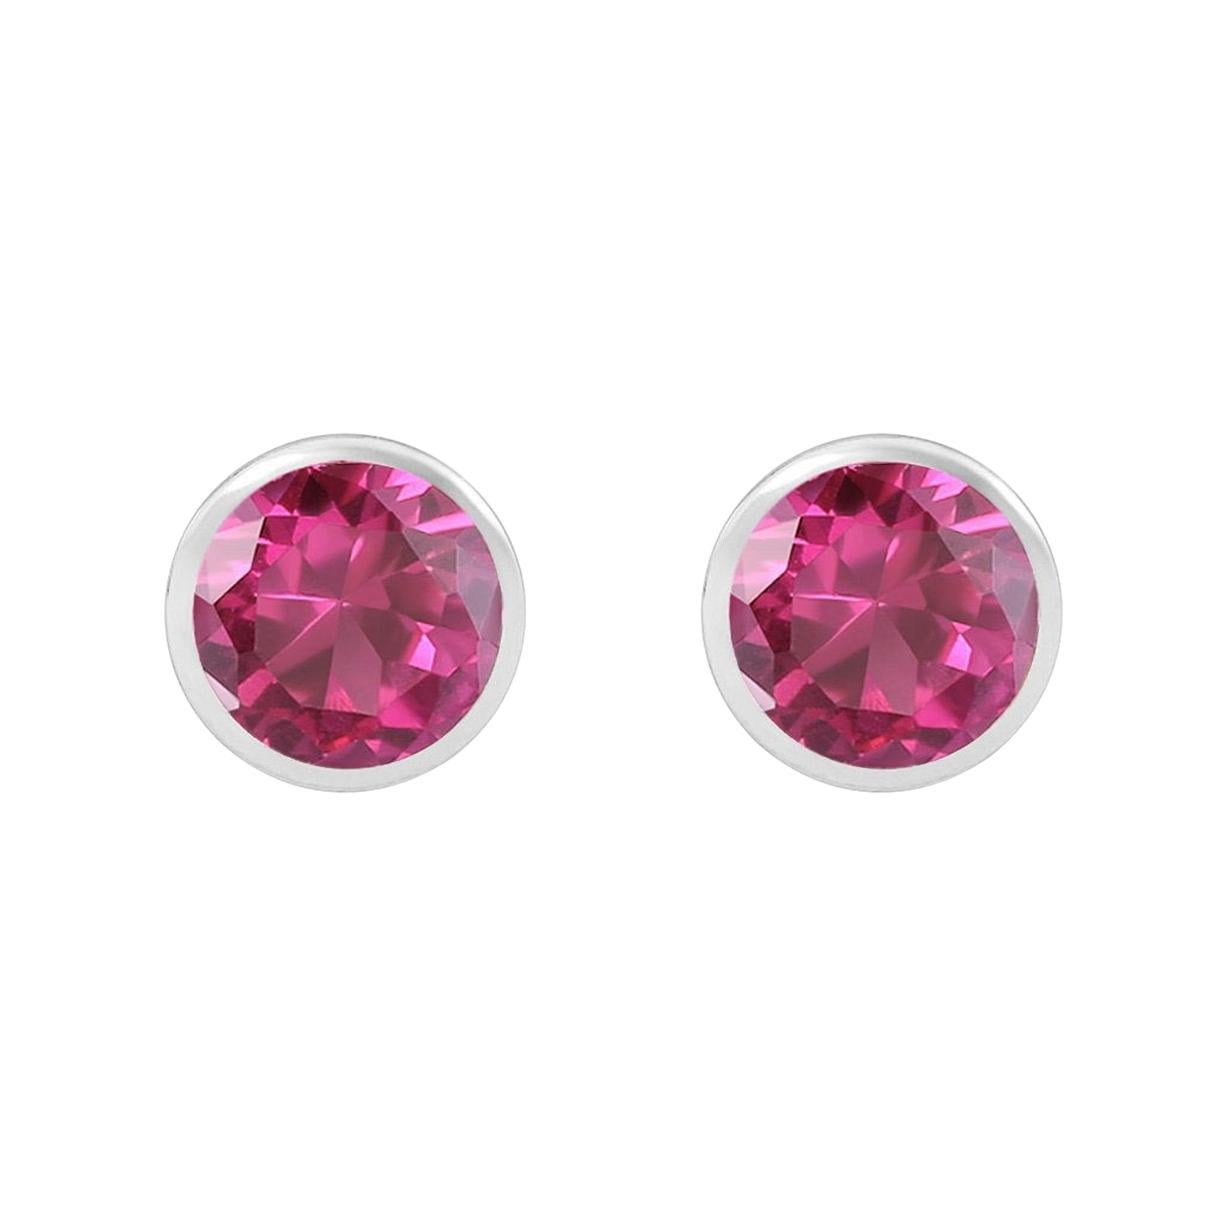 Handcrafted 2.60 Carats Pink Tourmaline 18 Karat White Gold Stud Earrings